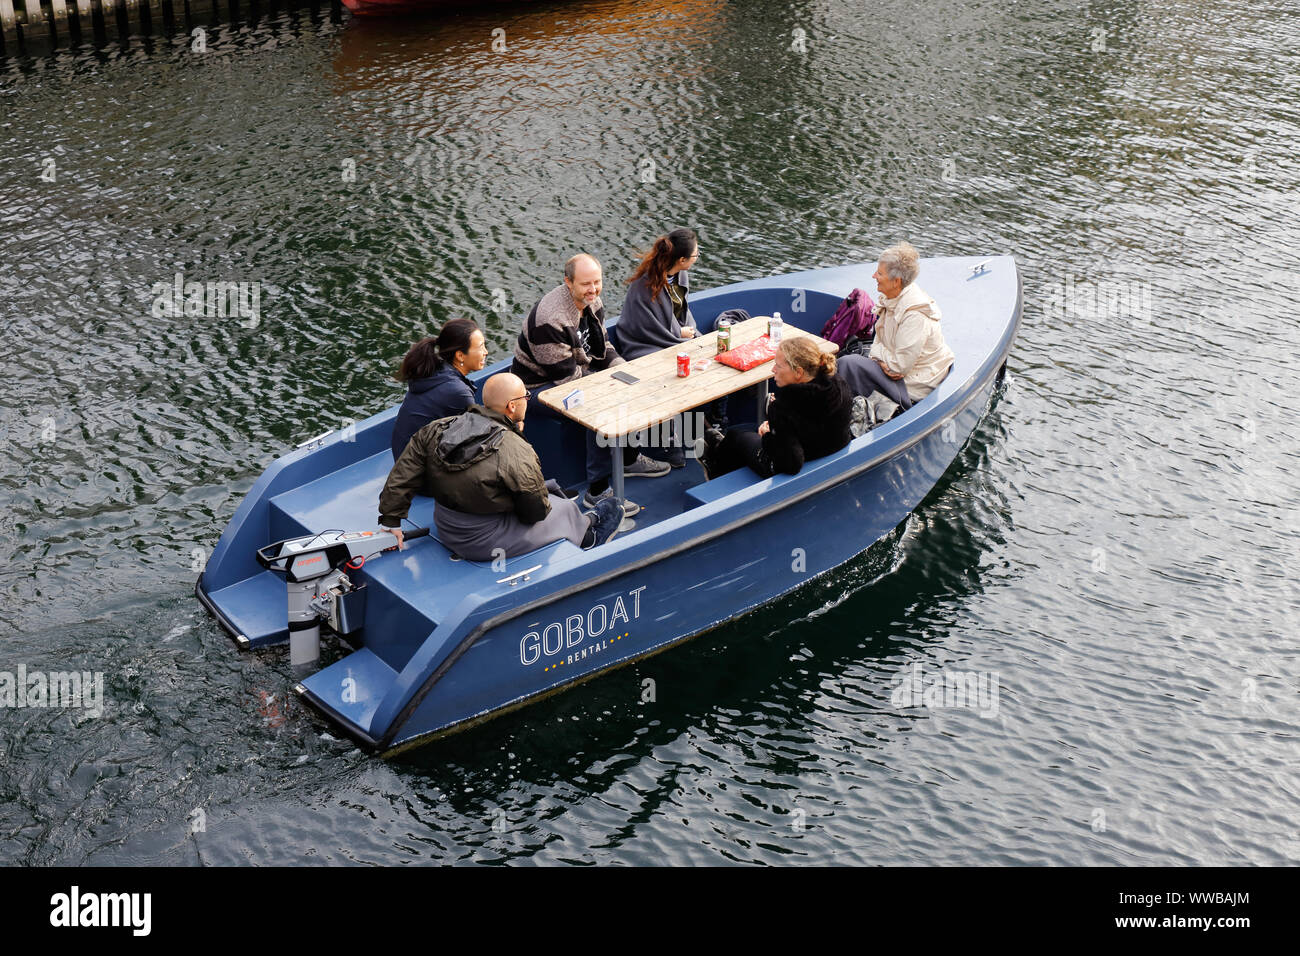 https://c8.alamy.com/comp/WWBAJM/copenhagen-denmark-september-4-2019-a-group-of-people-in-a-small-electric-rental-goboat-personal-sightseeing-boat-in-the-canal-in-the-fredrikshav-WWBAJM.jpg